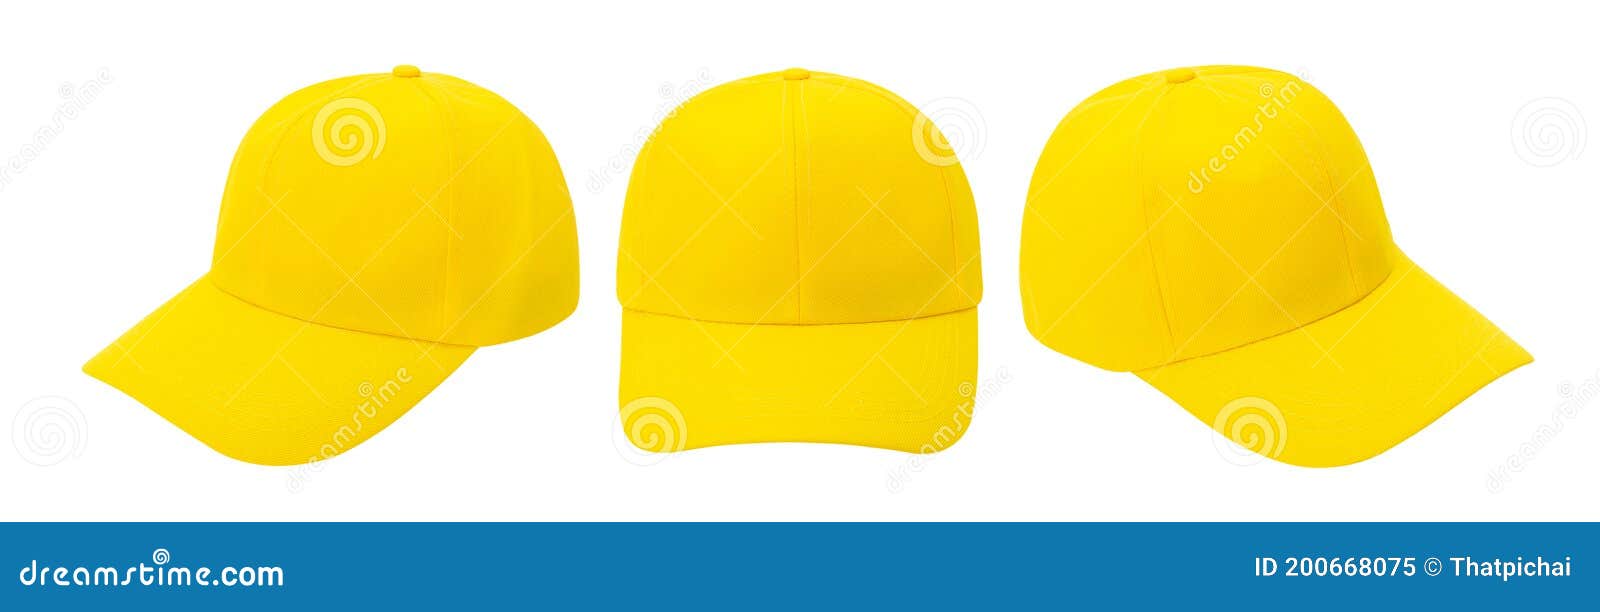 Download White Baseball Cap Mockup Front And Back View Isolated On ...